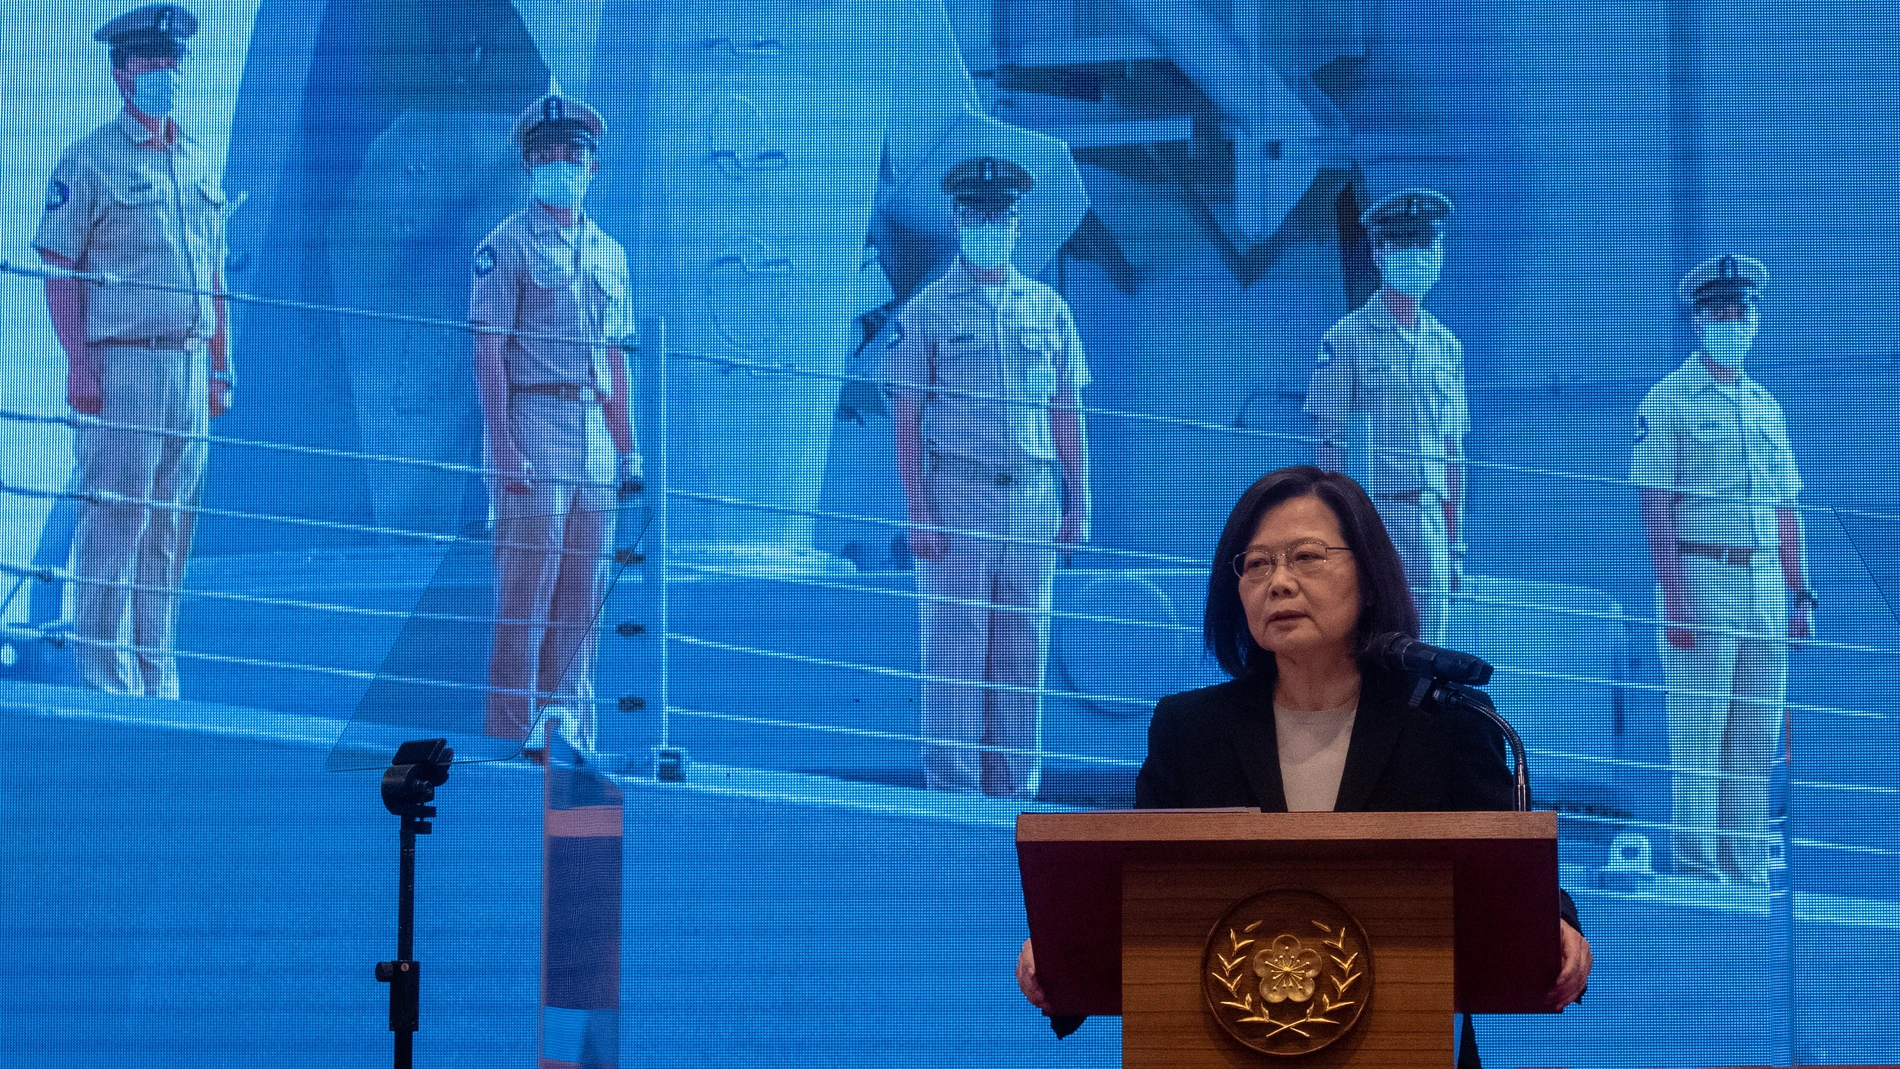 Taipei (Taiwan), 27/12/2022.- Taiwan President Tsai Ing-wen speaks in front of a screen showing defense forces, during a press conference in Taipei, Taiwan, 27 December 2022. Tsai addresses national security issues including the recent Chinese military incursion above Taiwan airspace on 26 December. EFE/EPA/RITCHIE B. TONGO